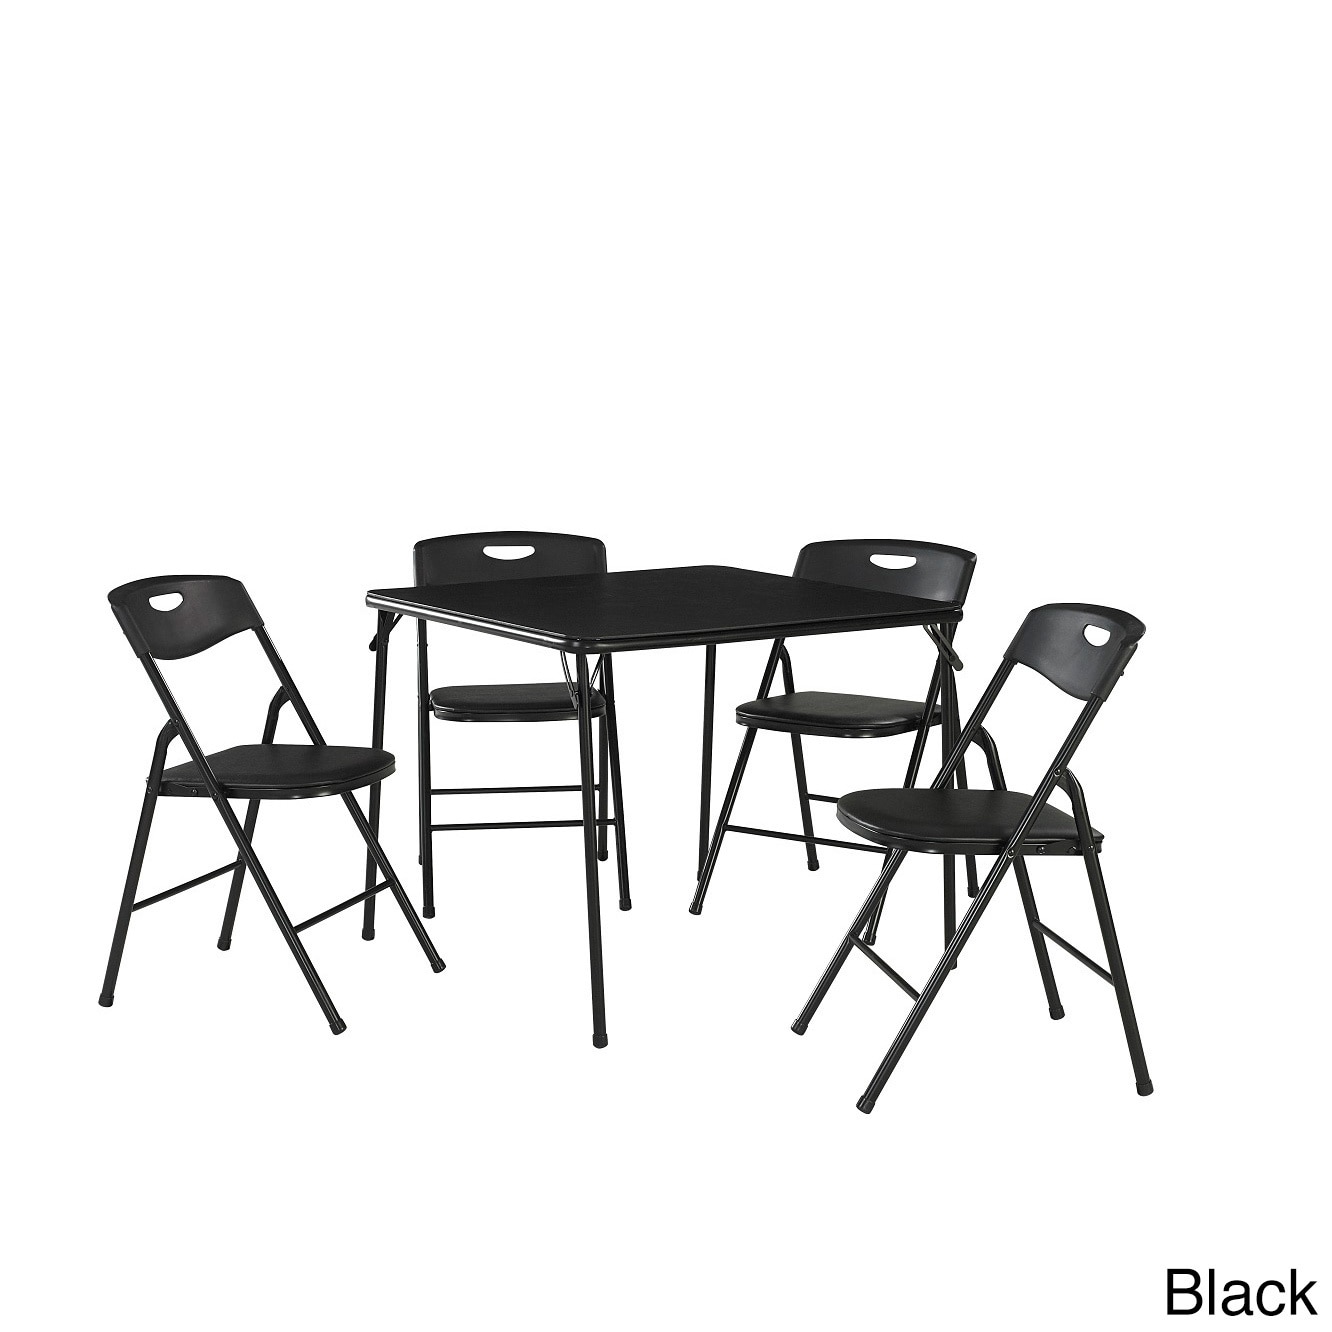 Cosco 5 piece Folding Table And Chairs Set